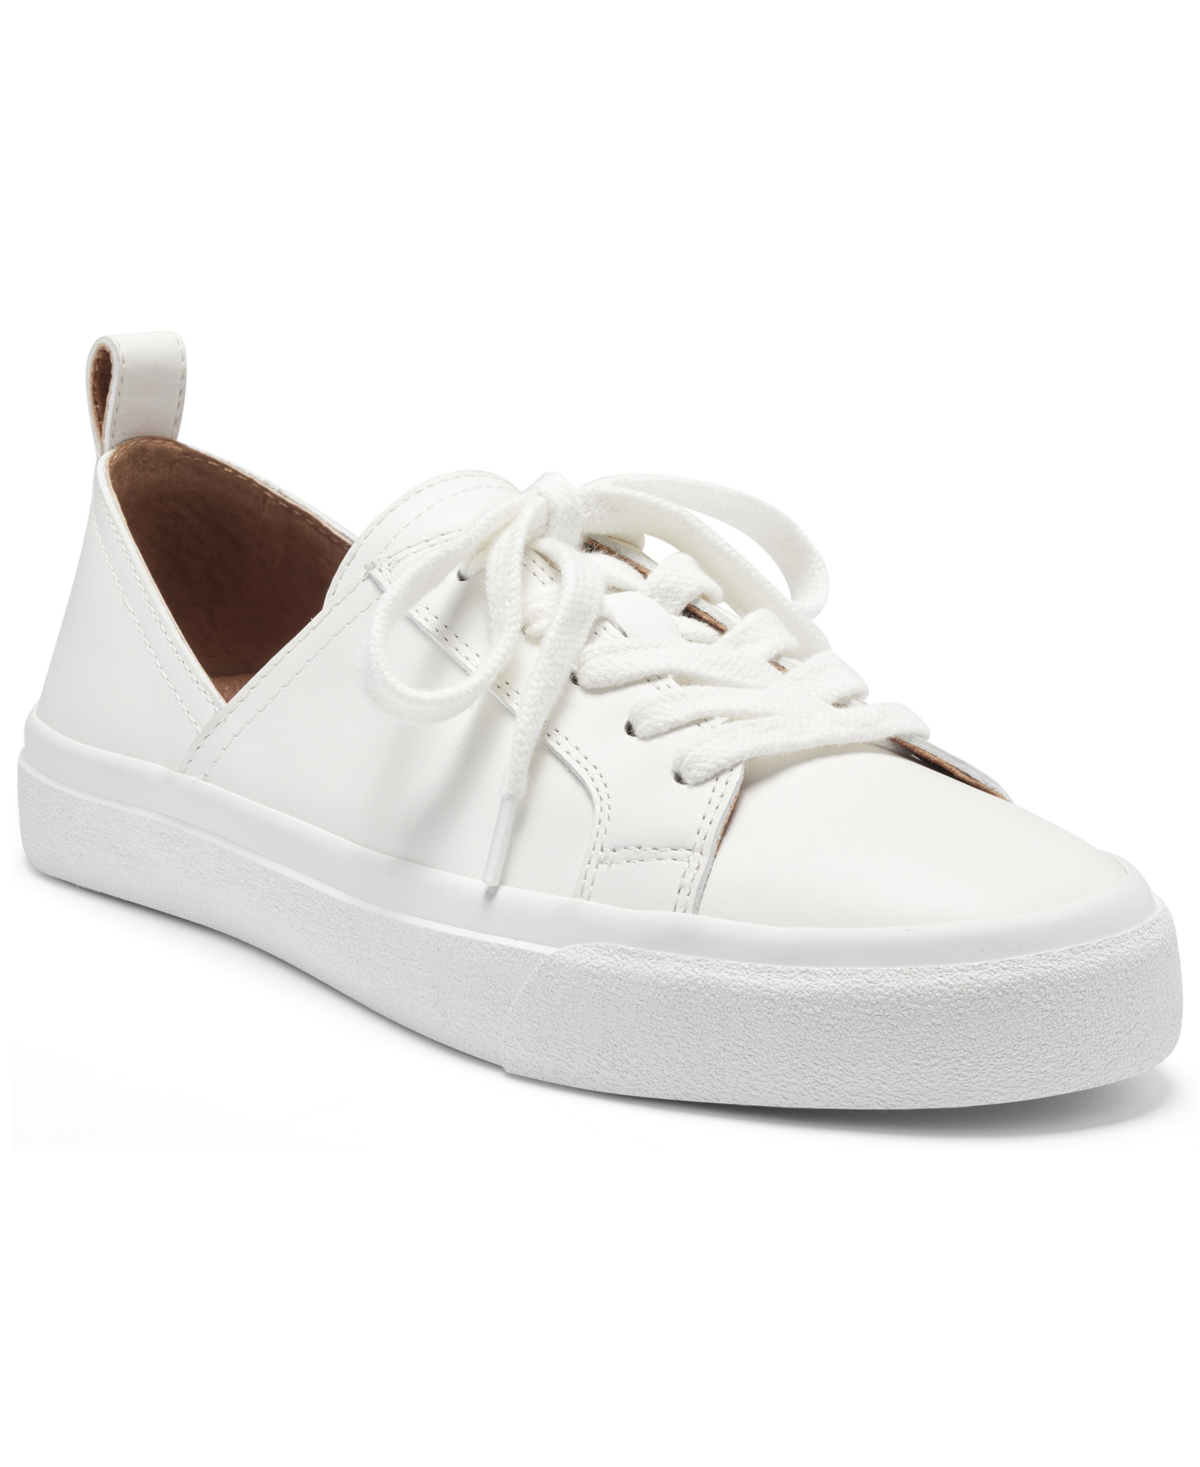 Women's Dansbey Lace-Up Sneakers - White